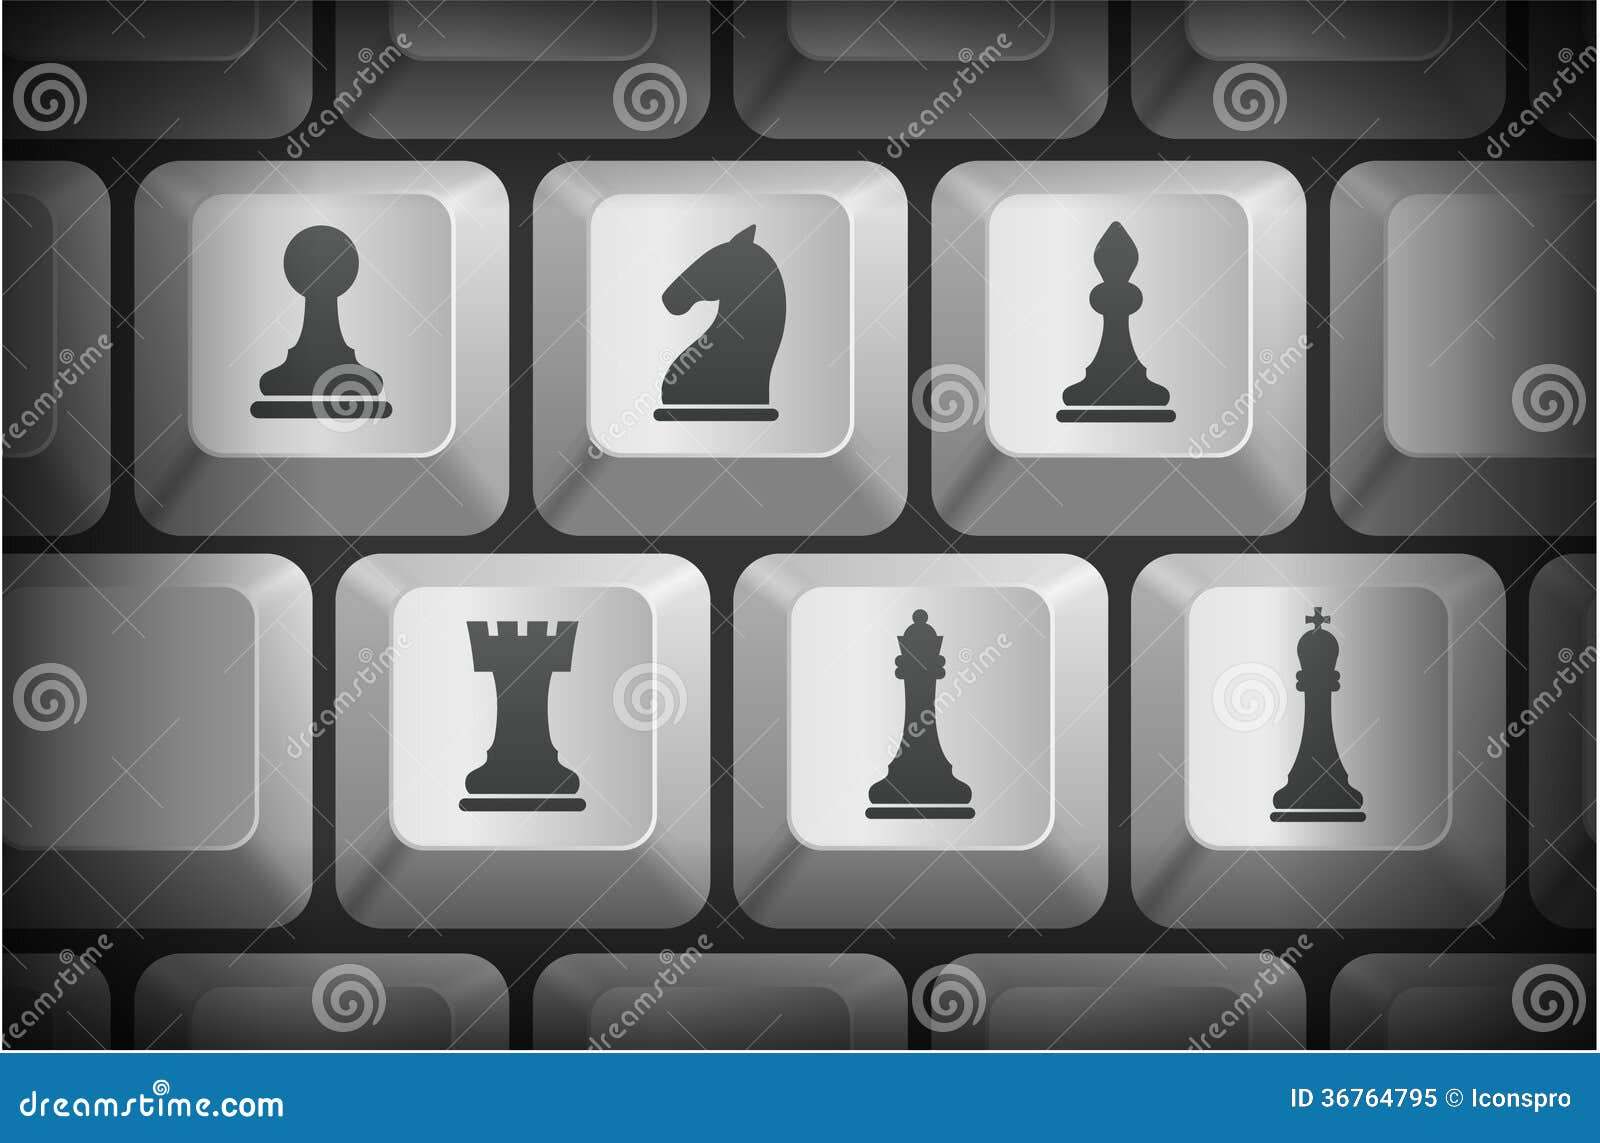 Premium Vector  Playing chess against the computer